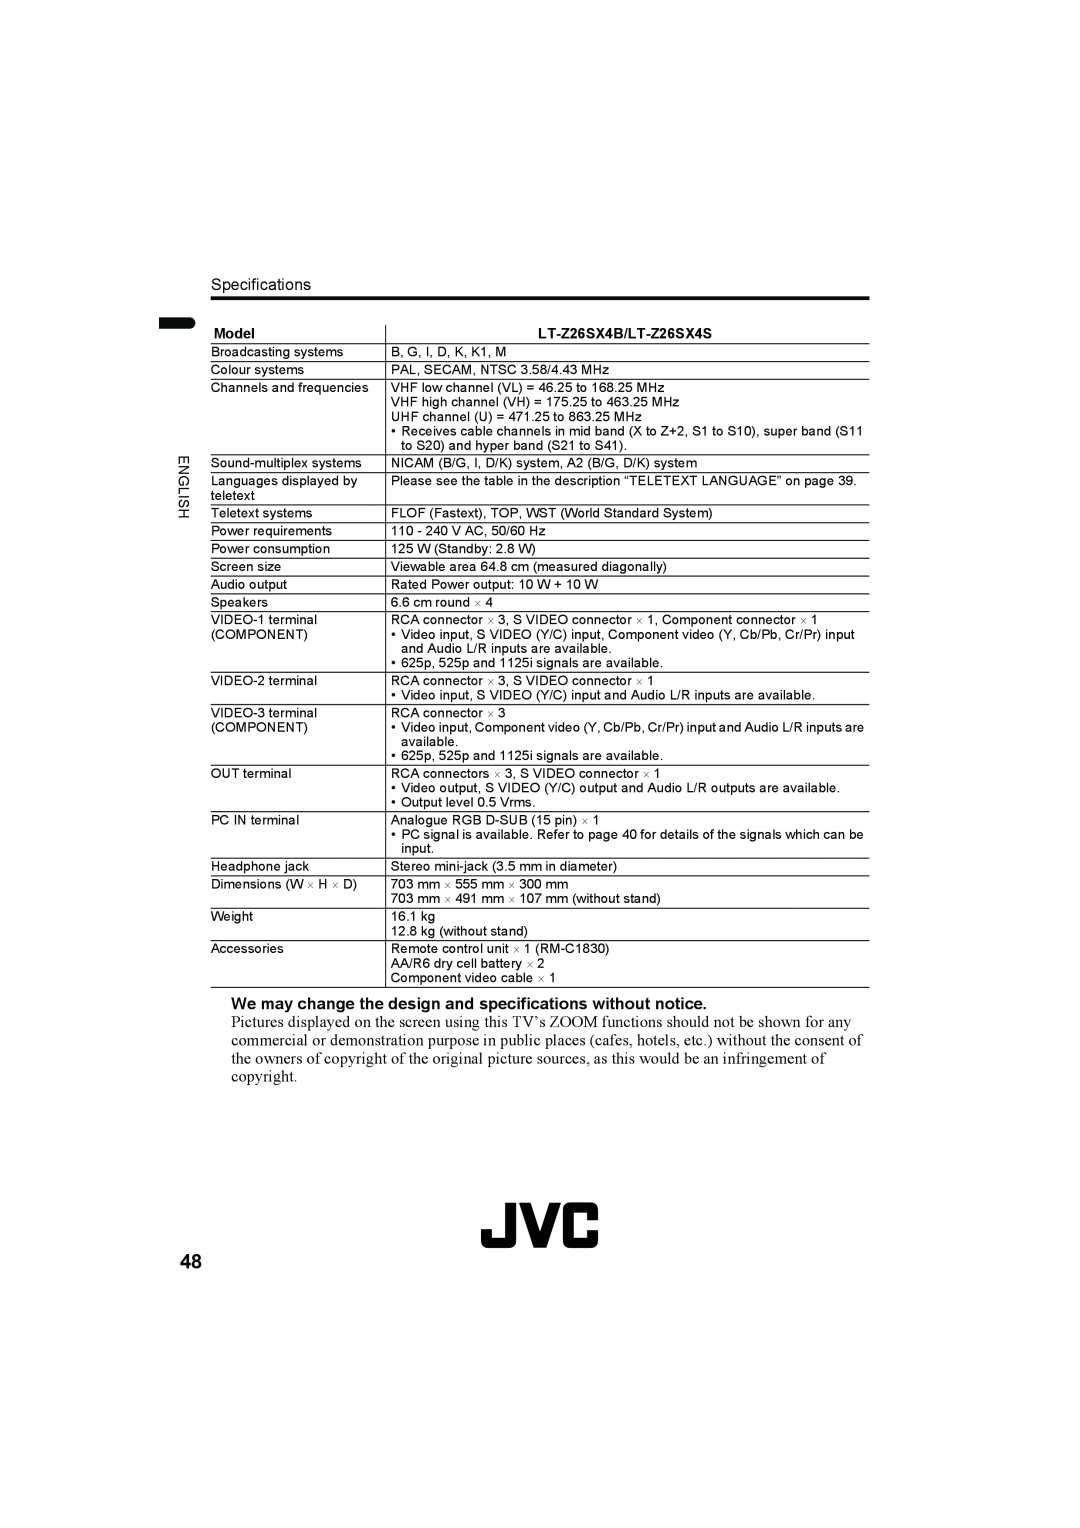 JVC LT-Z32SX4B Specifications, We may change the design and specifications without notice, Model, LT-Z26SX4B/LT-Z26SX4S 